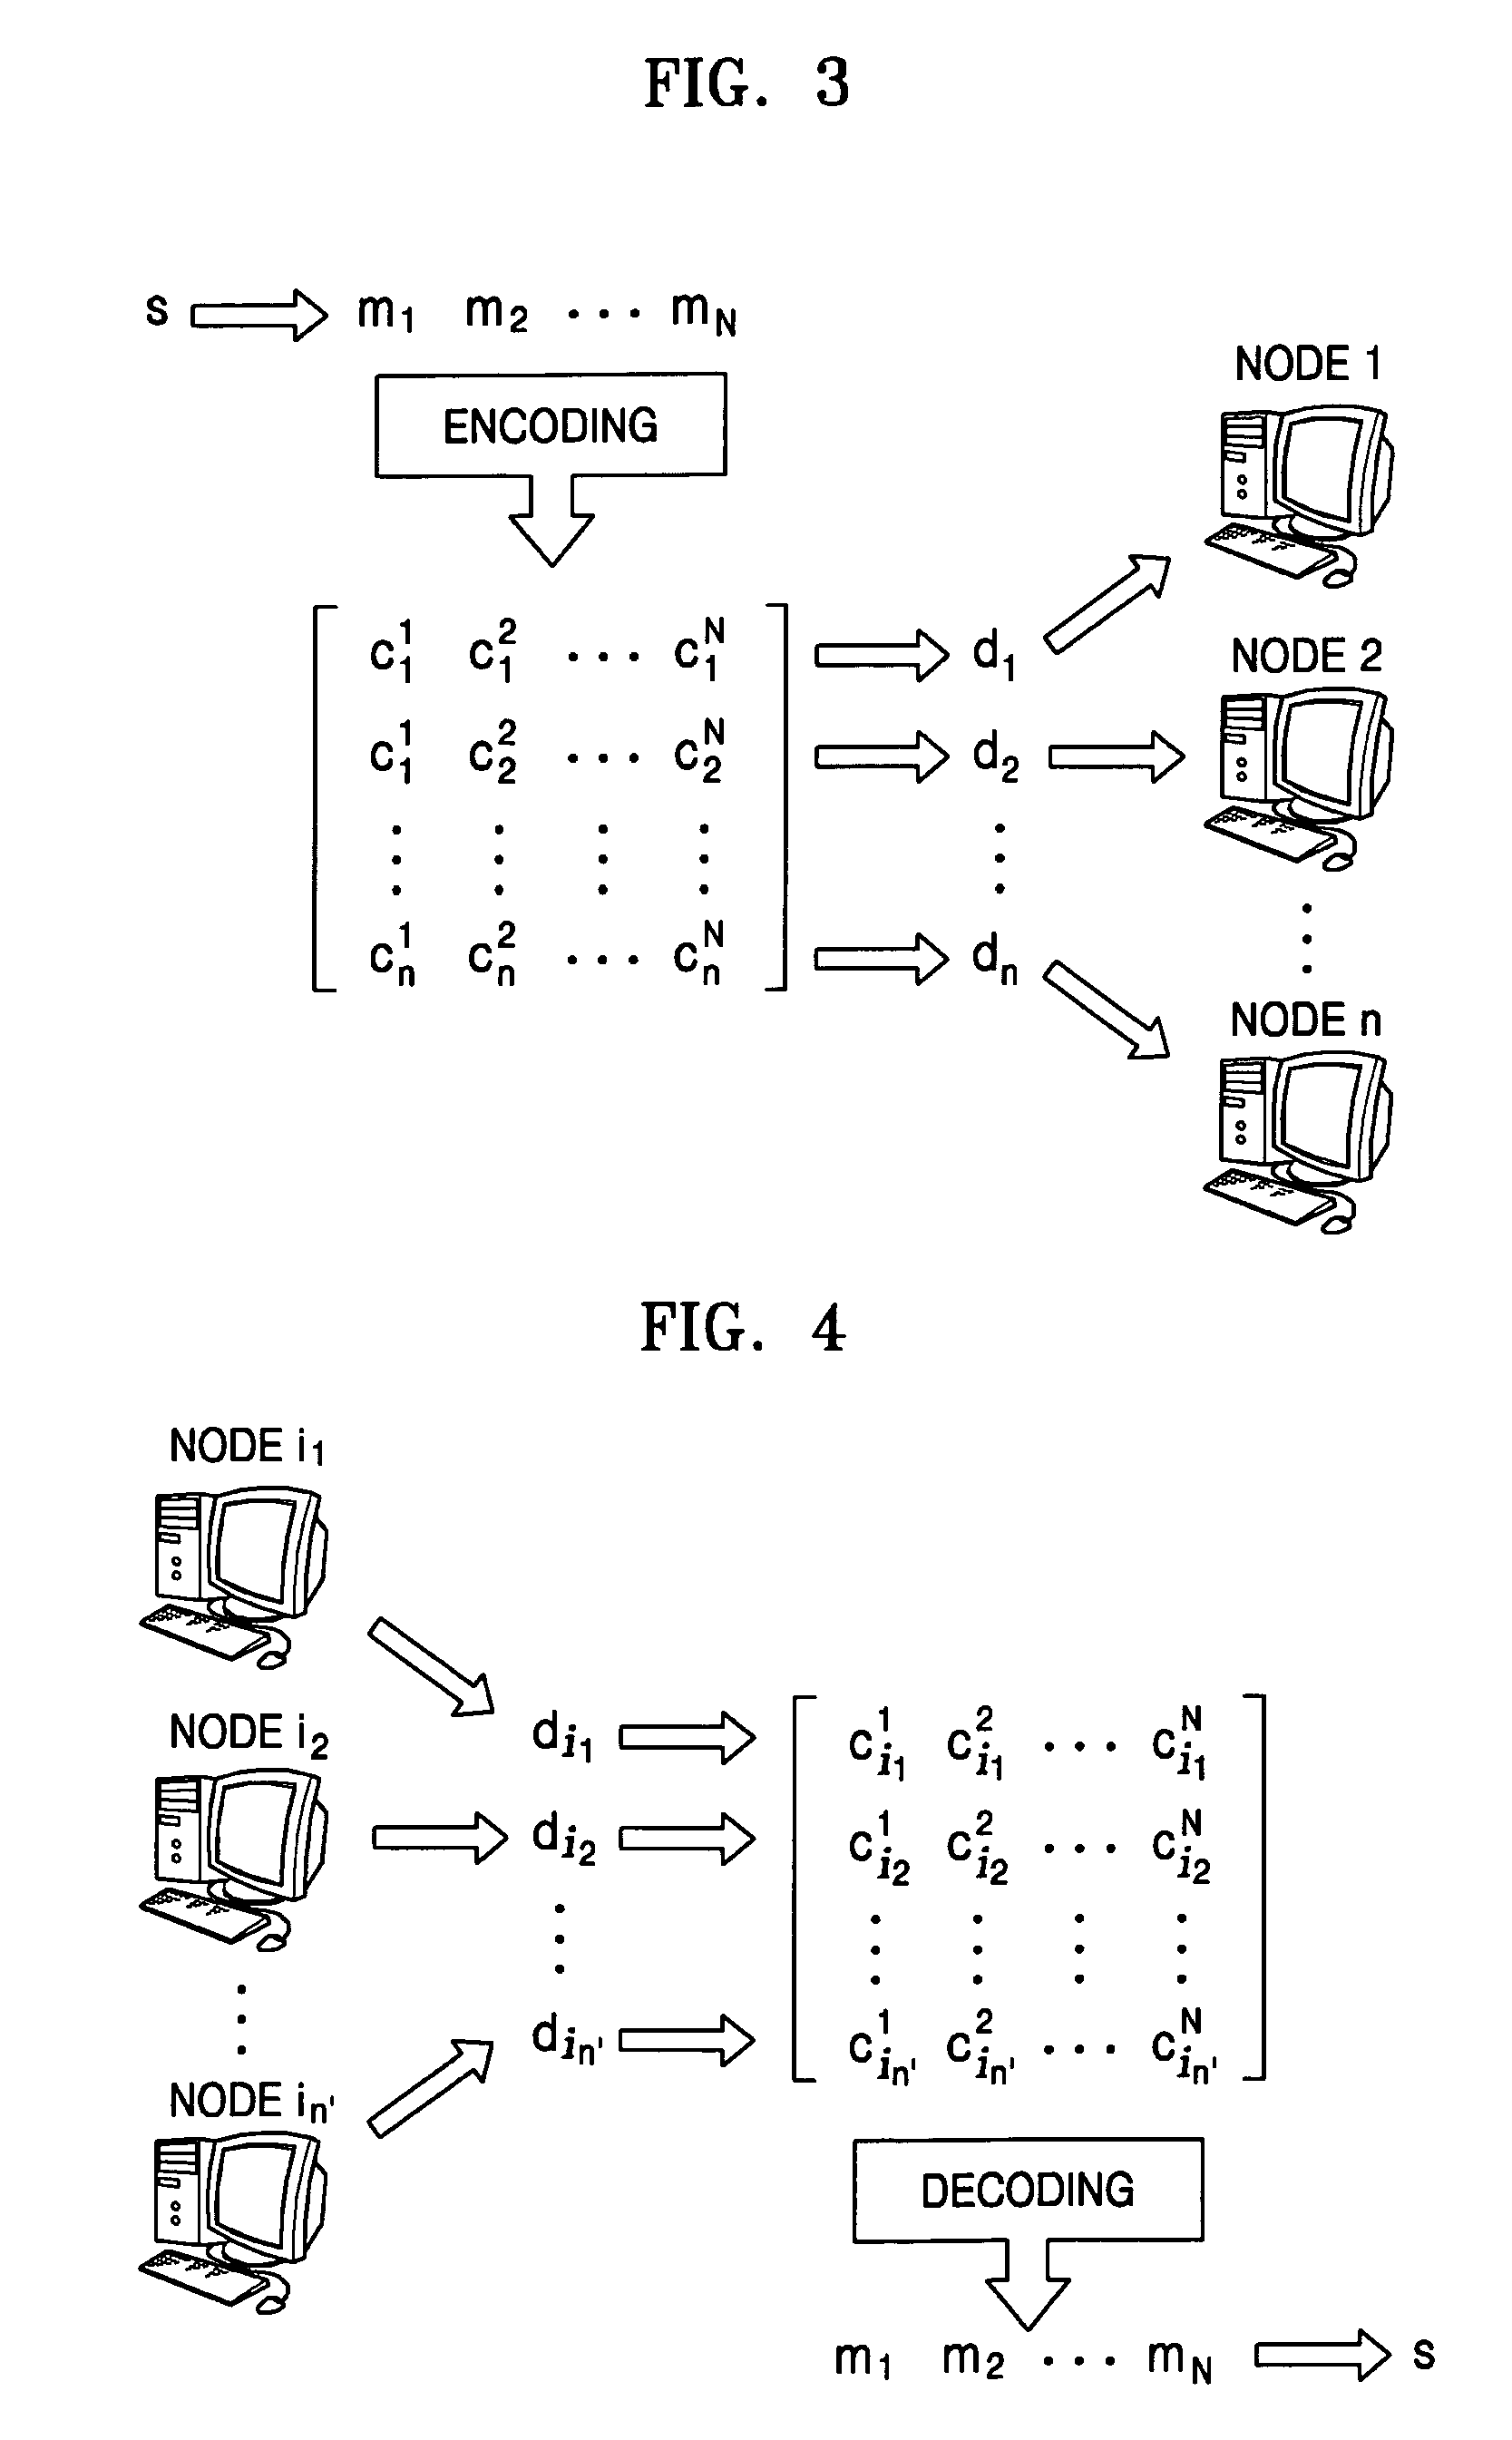 Method and system for distributed certificate management in ad-hoc networks